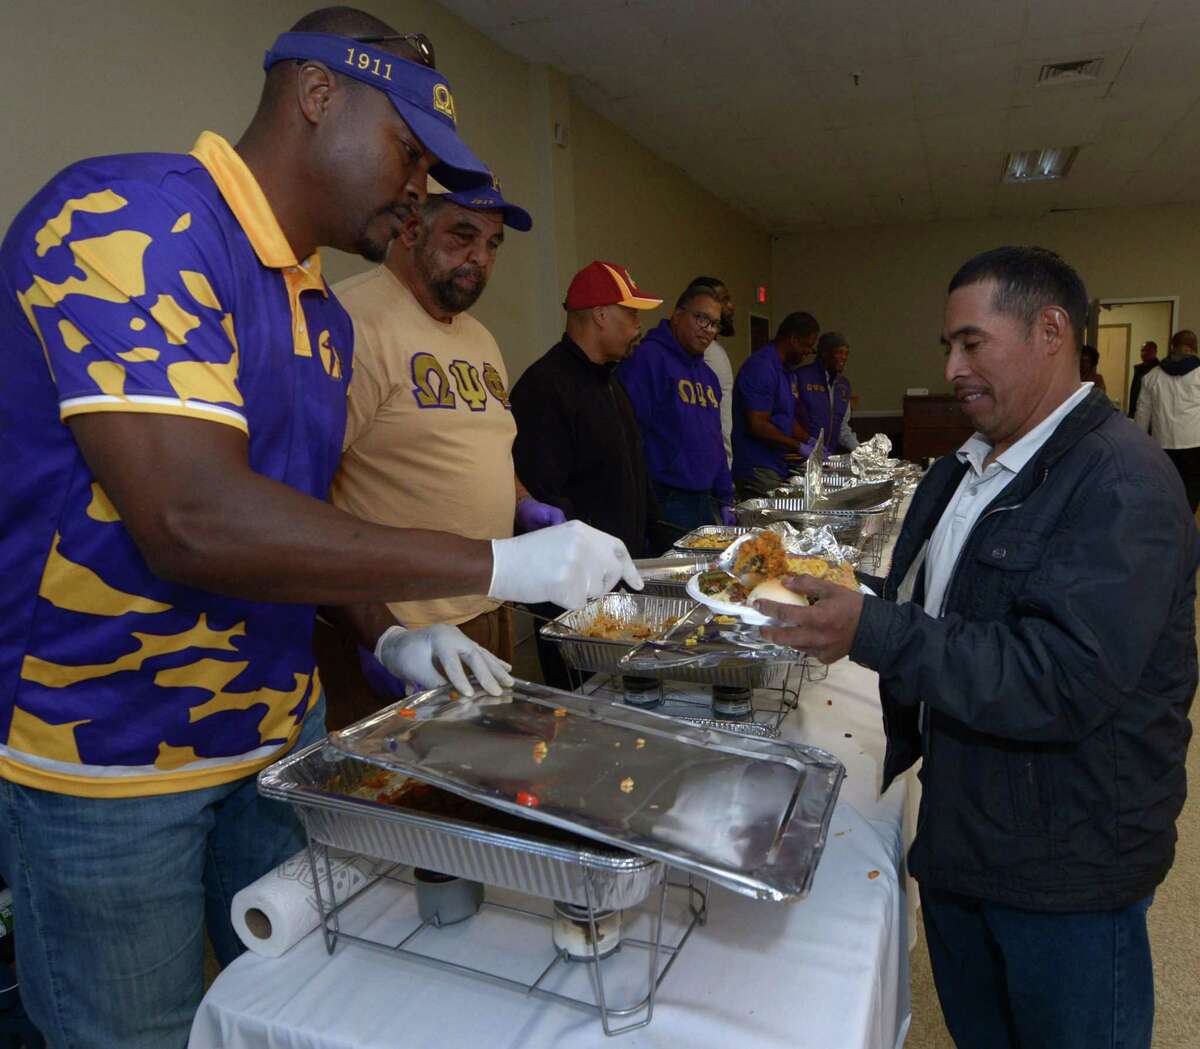 Omega Psi Phi alumni serve food during the South Norwalk Community Association annual Thanksgiving Day meal Thursday, November 23, 2017, at the South Norwalk Community Center in Norwalk, Conn.